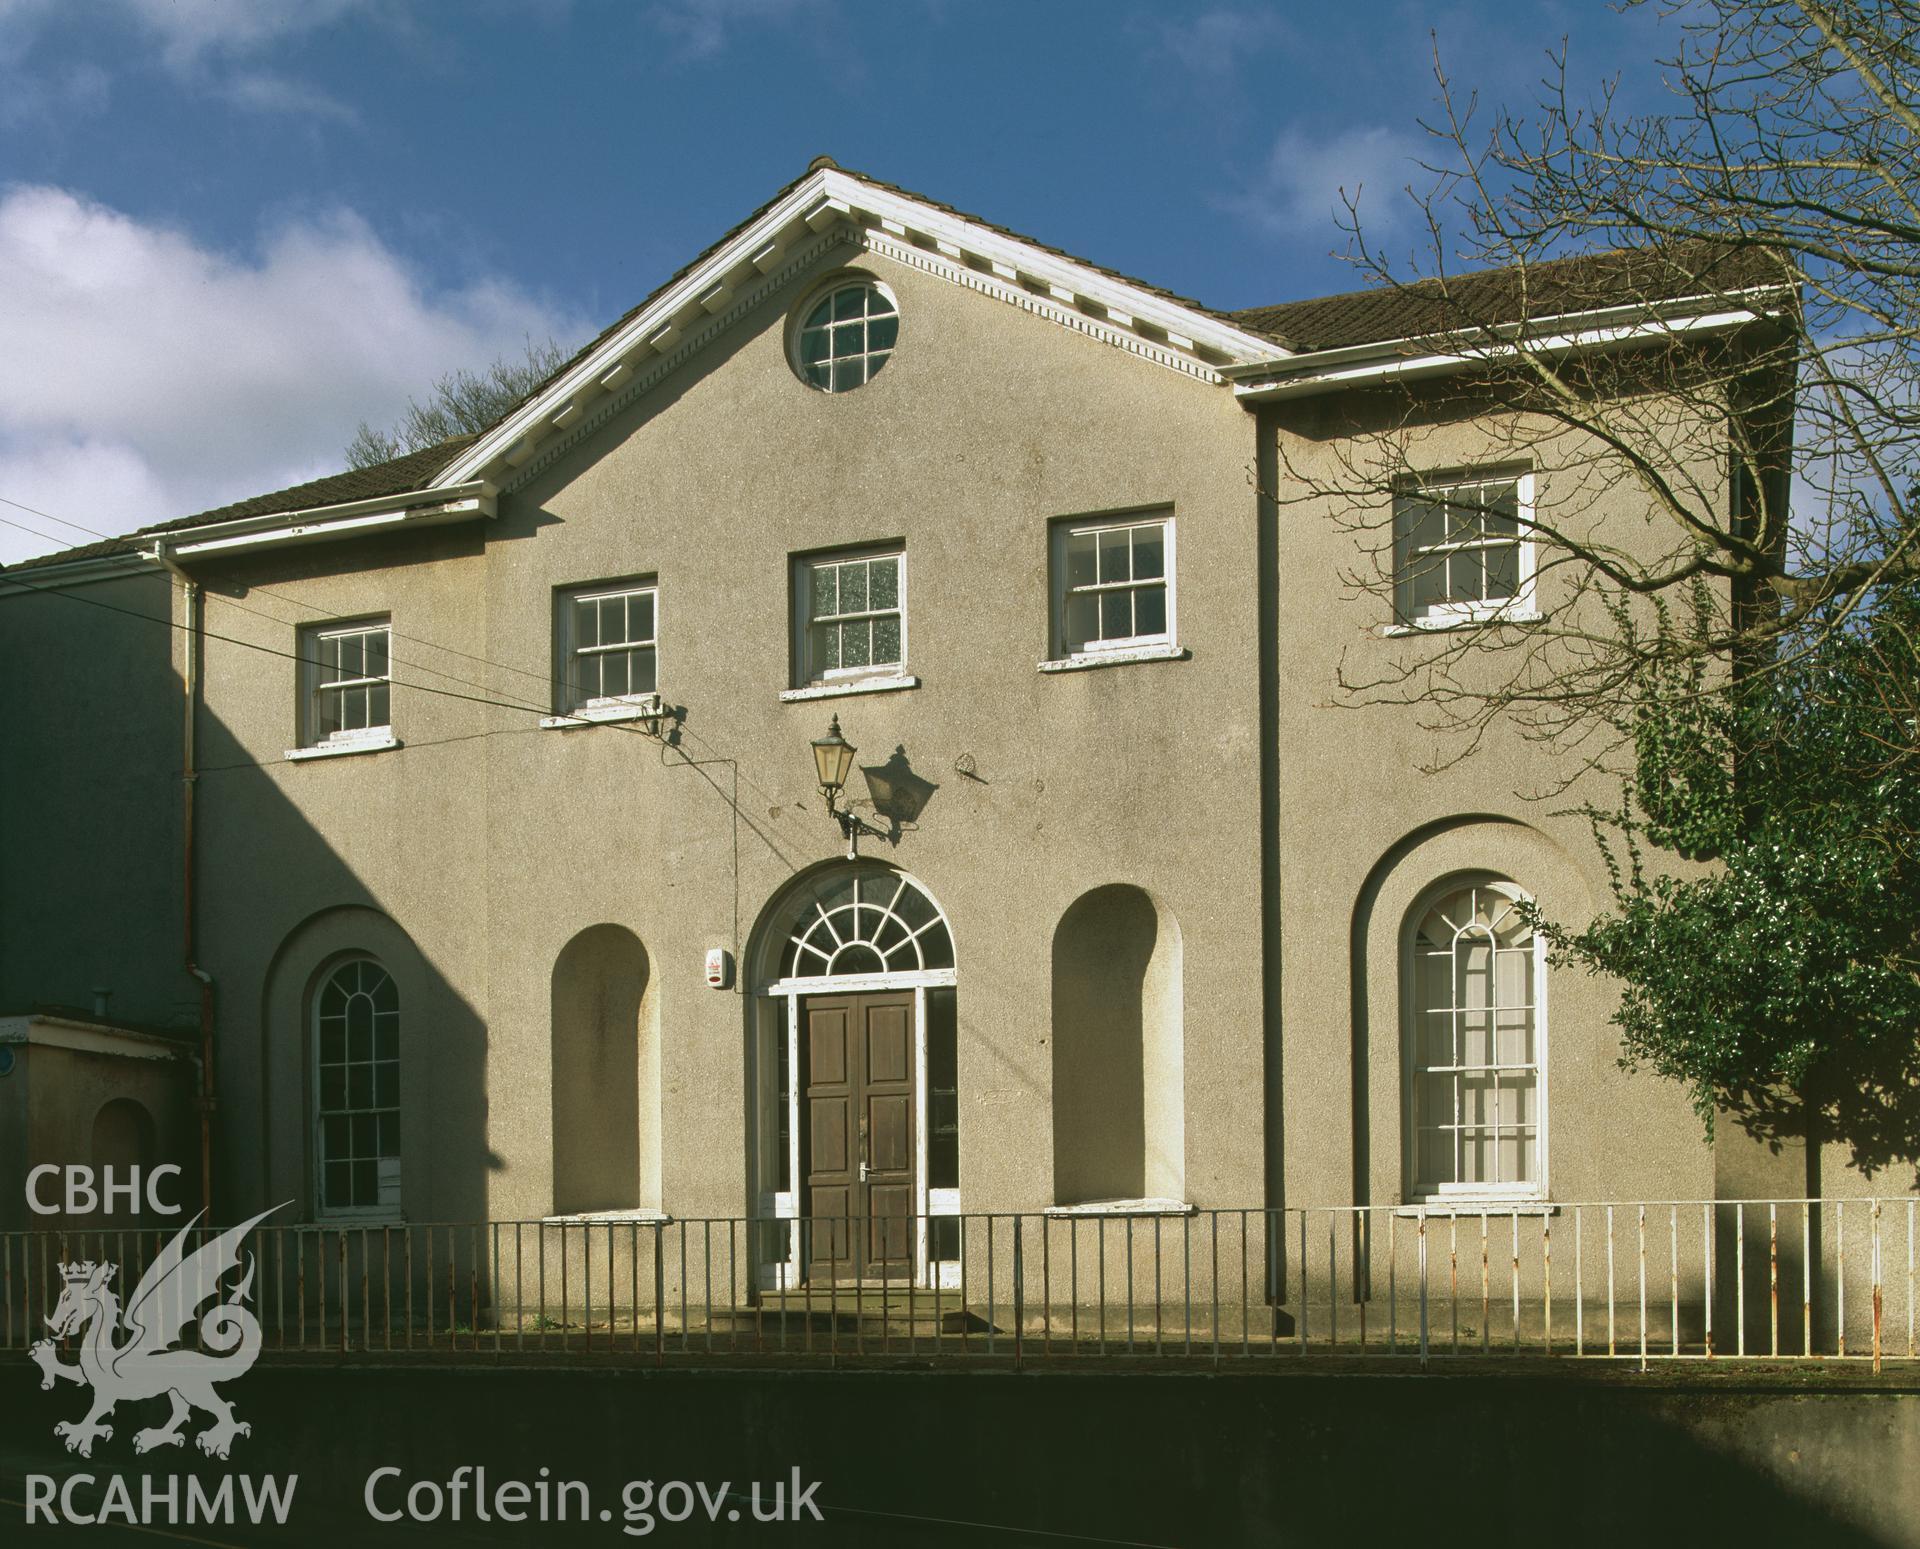 RCAHMW colour transparency showing exterior view of Foley House, Goat Street, Haverfordwest, taken by Iain Wright, 2003